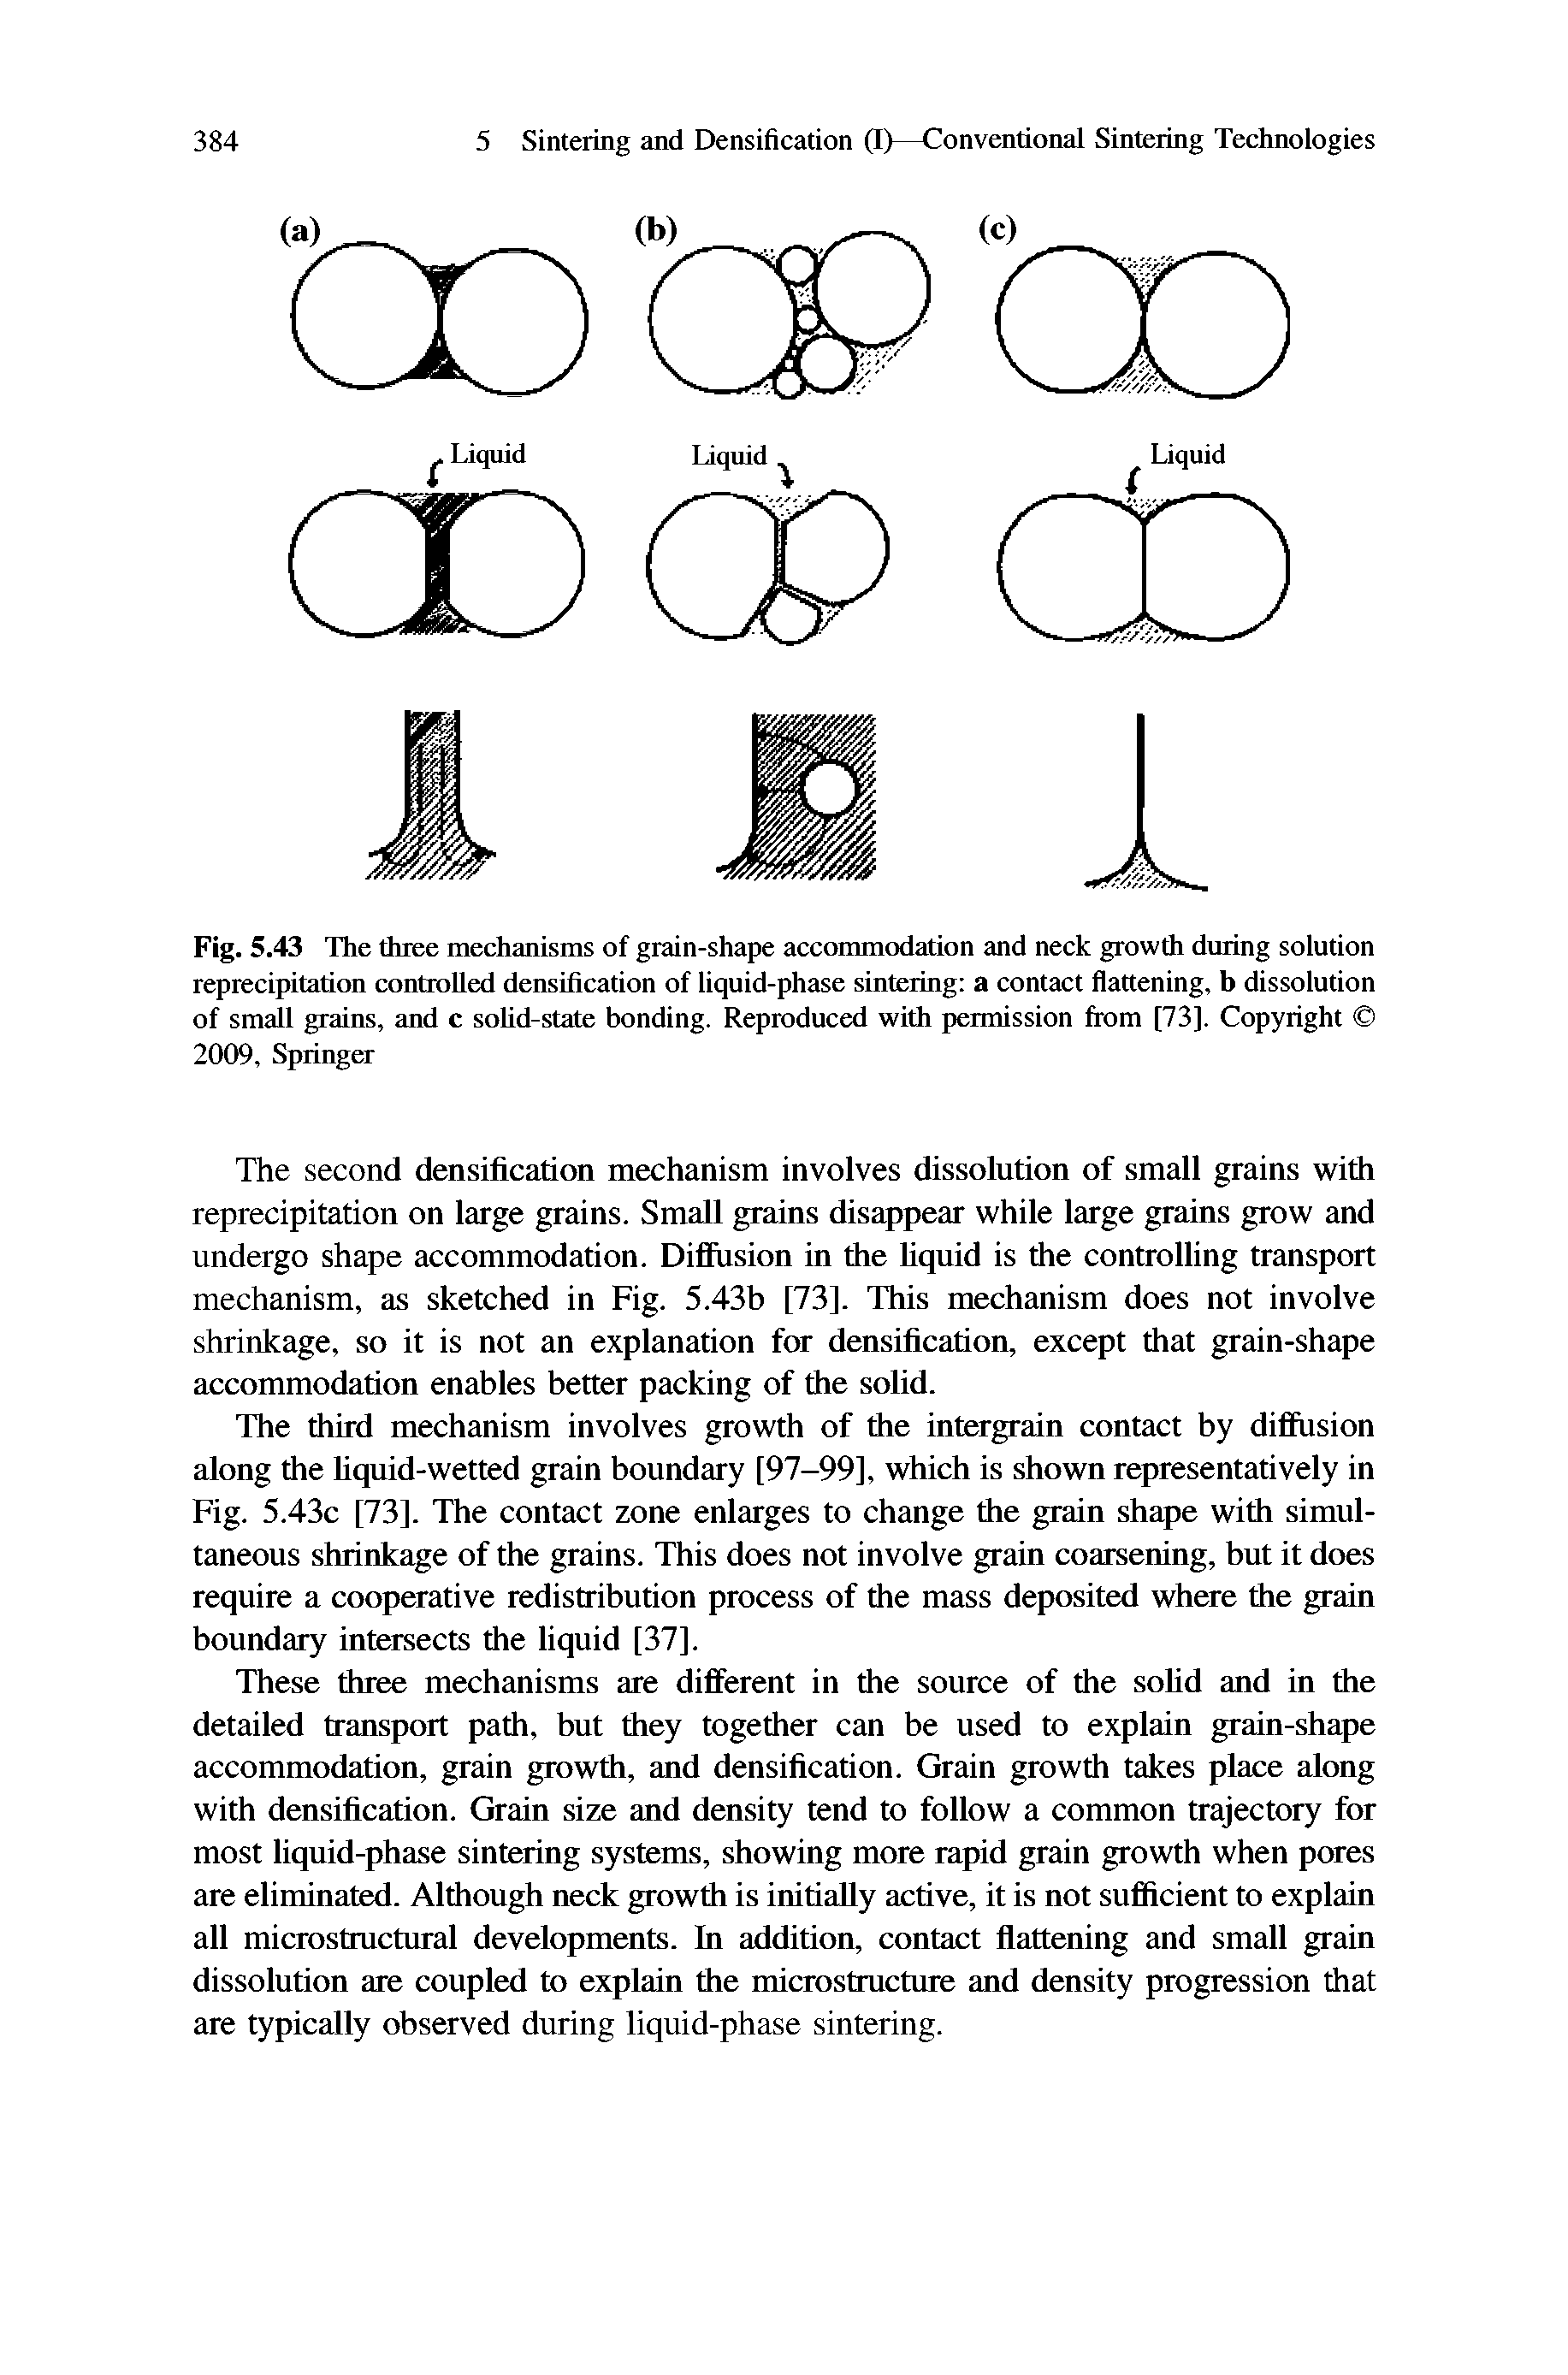 Fig. 5.43 The three mechanisms of grain-shape accommodation and neck growth during solution reprecipitation controlled densification of liquid-phase sintering a contact flattening, b dissolution of small grains, and c solid-state bonding. Reproduced with permission from [73]. Copyright 2009, Springer...